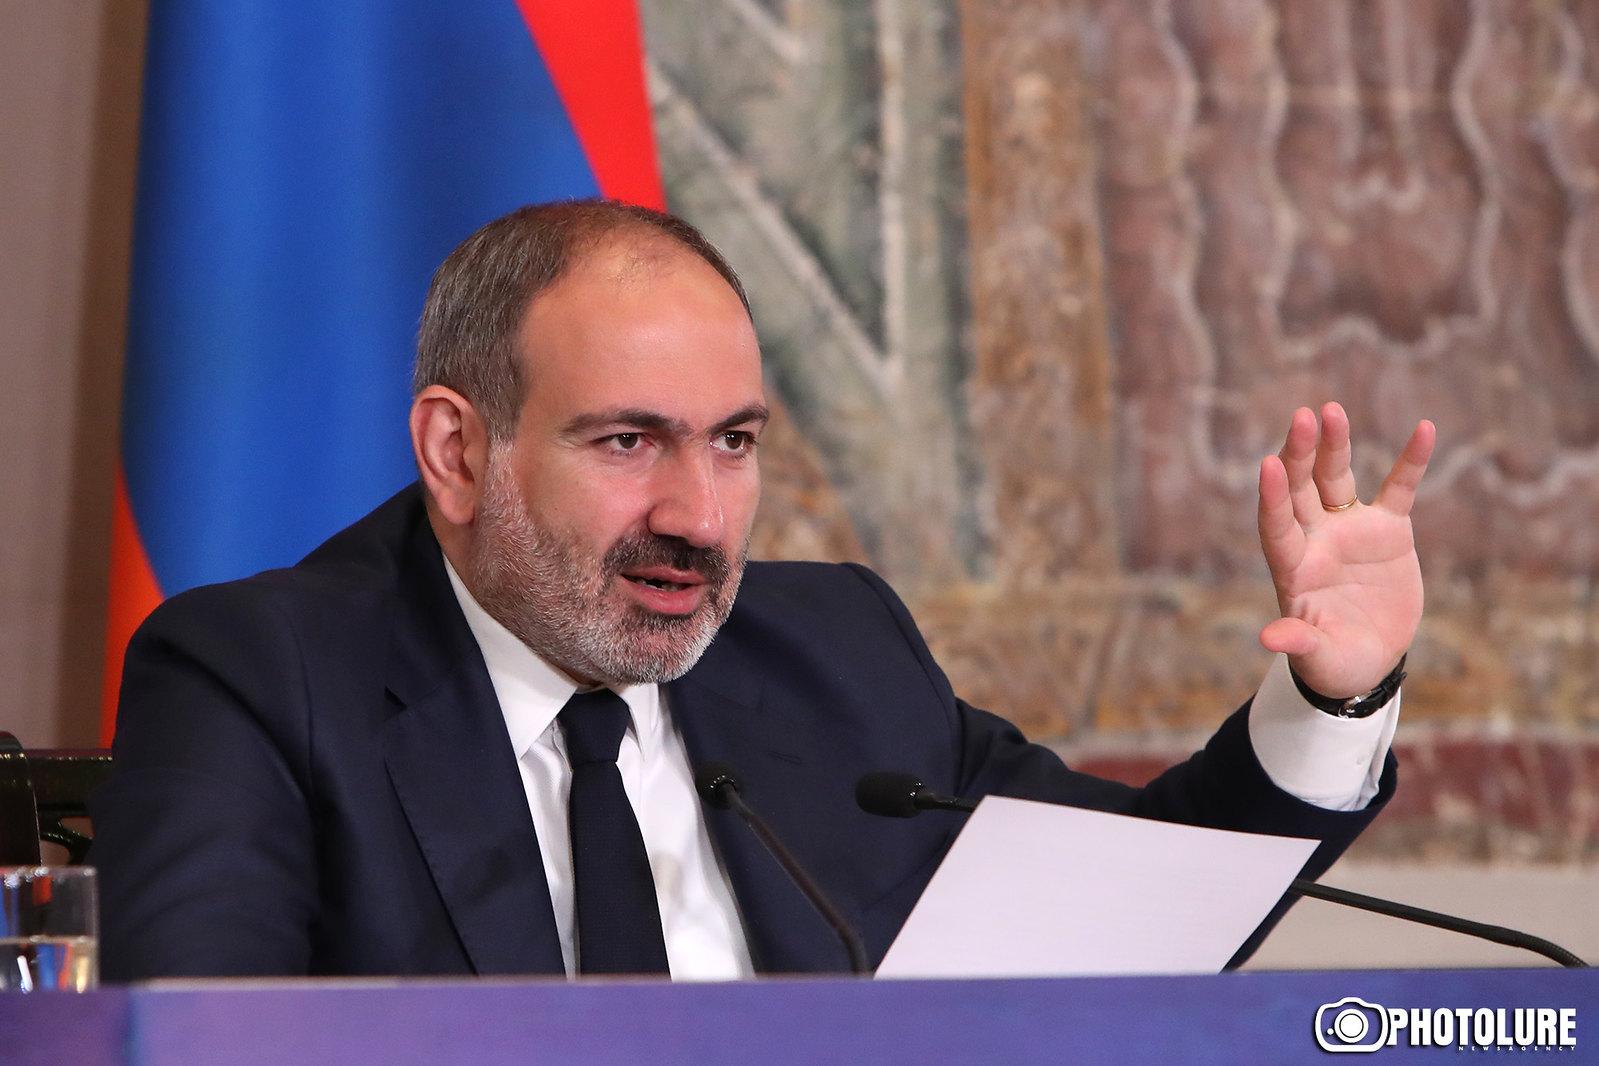 The Five Points of Surgical Intervention of the Judiciary System. Nikol Pashinyan